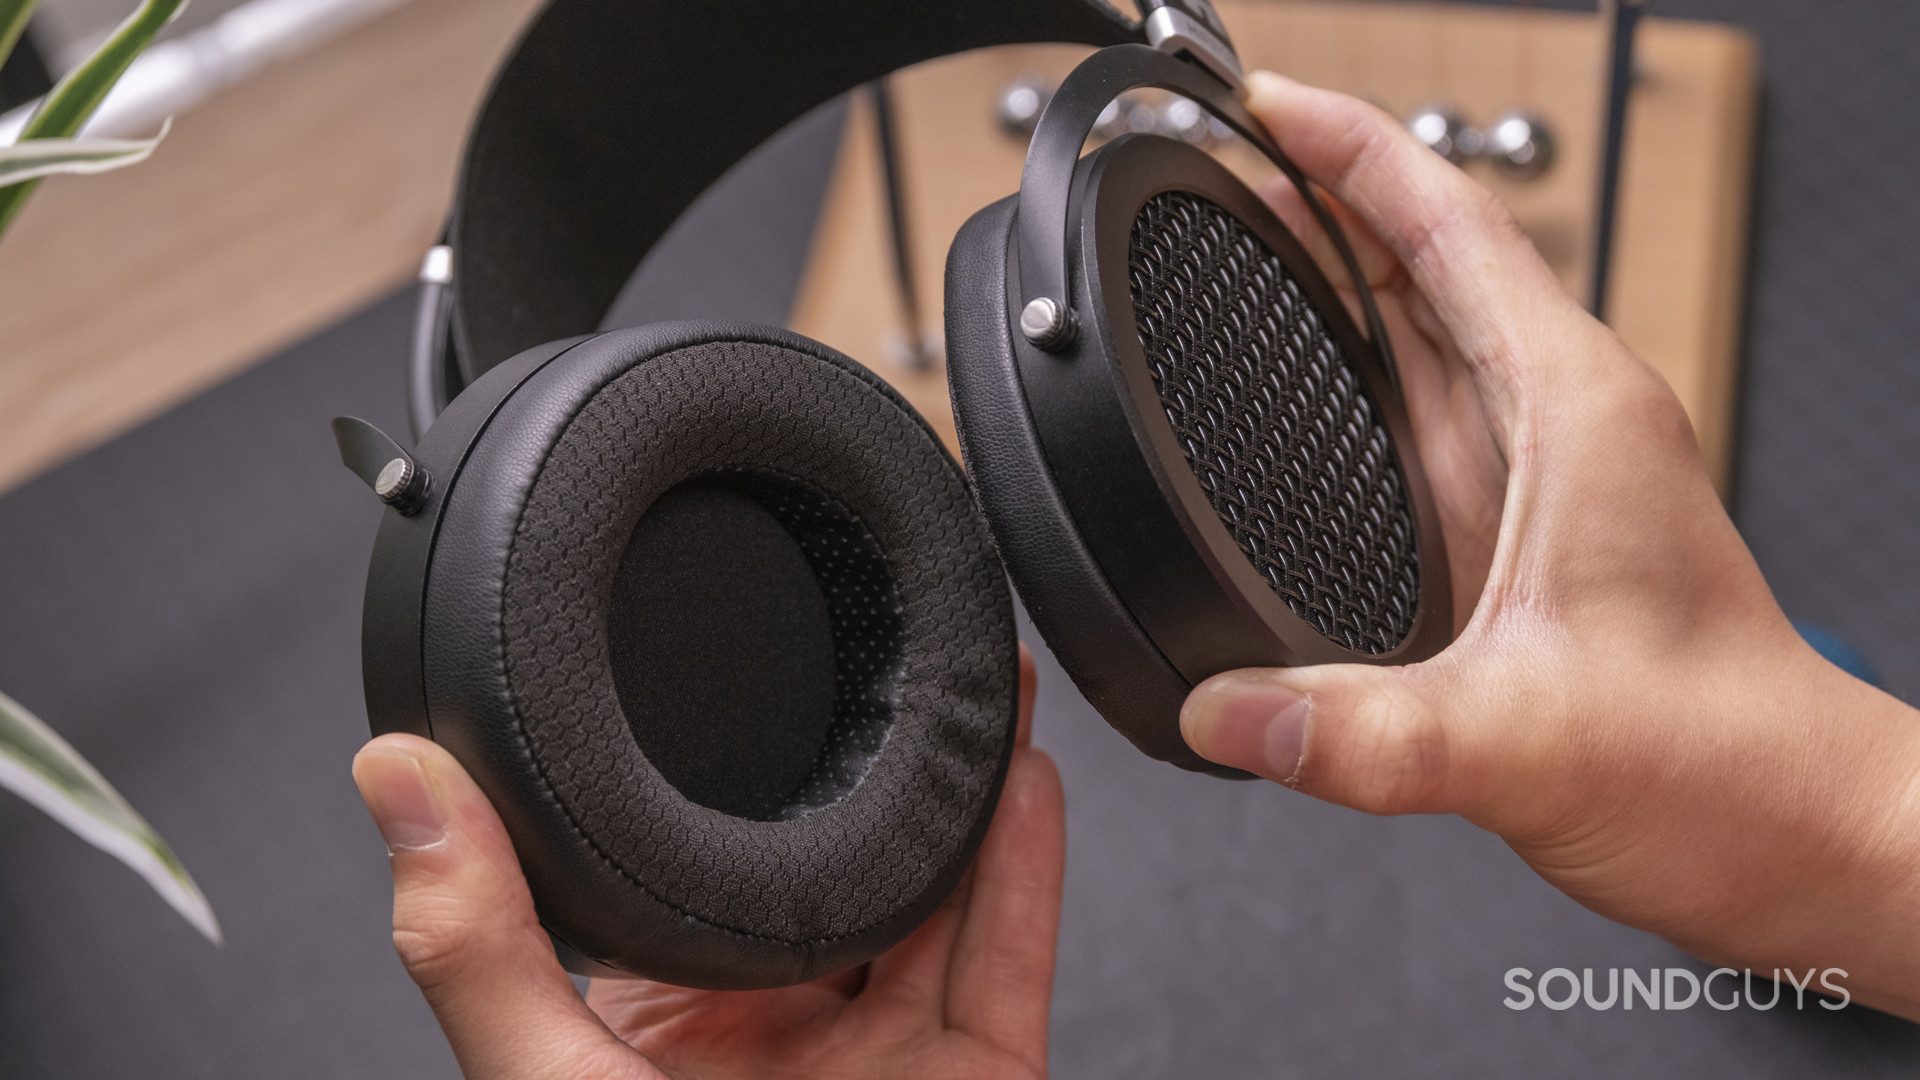 Hands hold the HiFiMan Sundara open-back headphones in front of a black backdrop with wooden accessories.